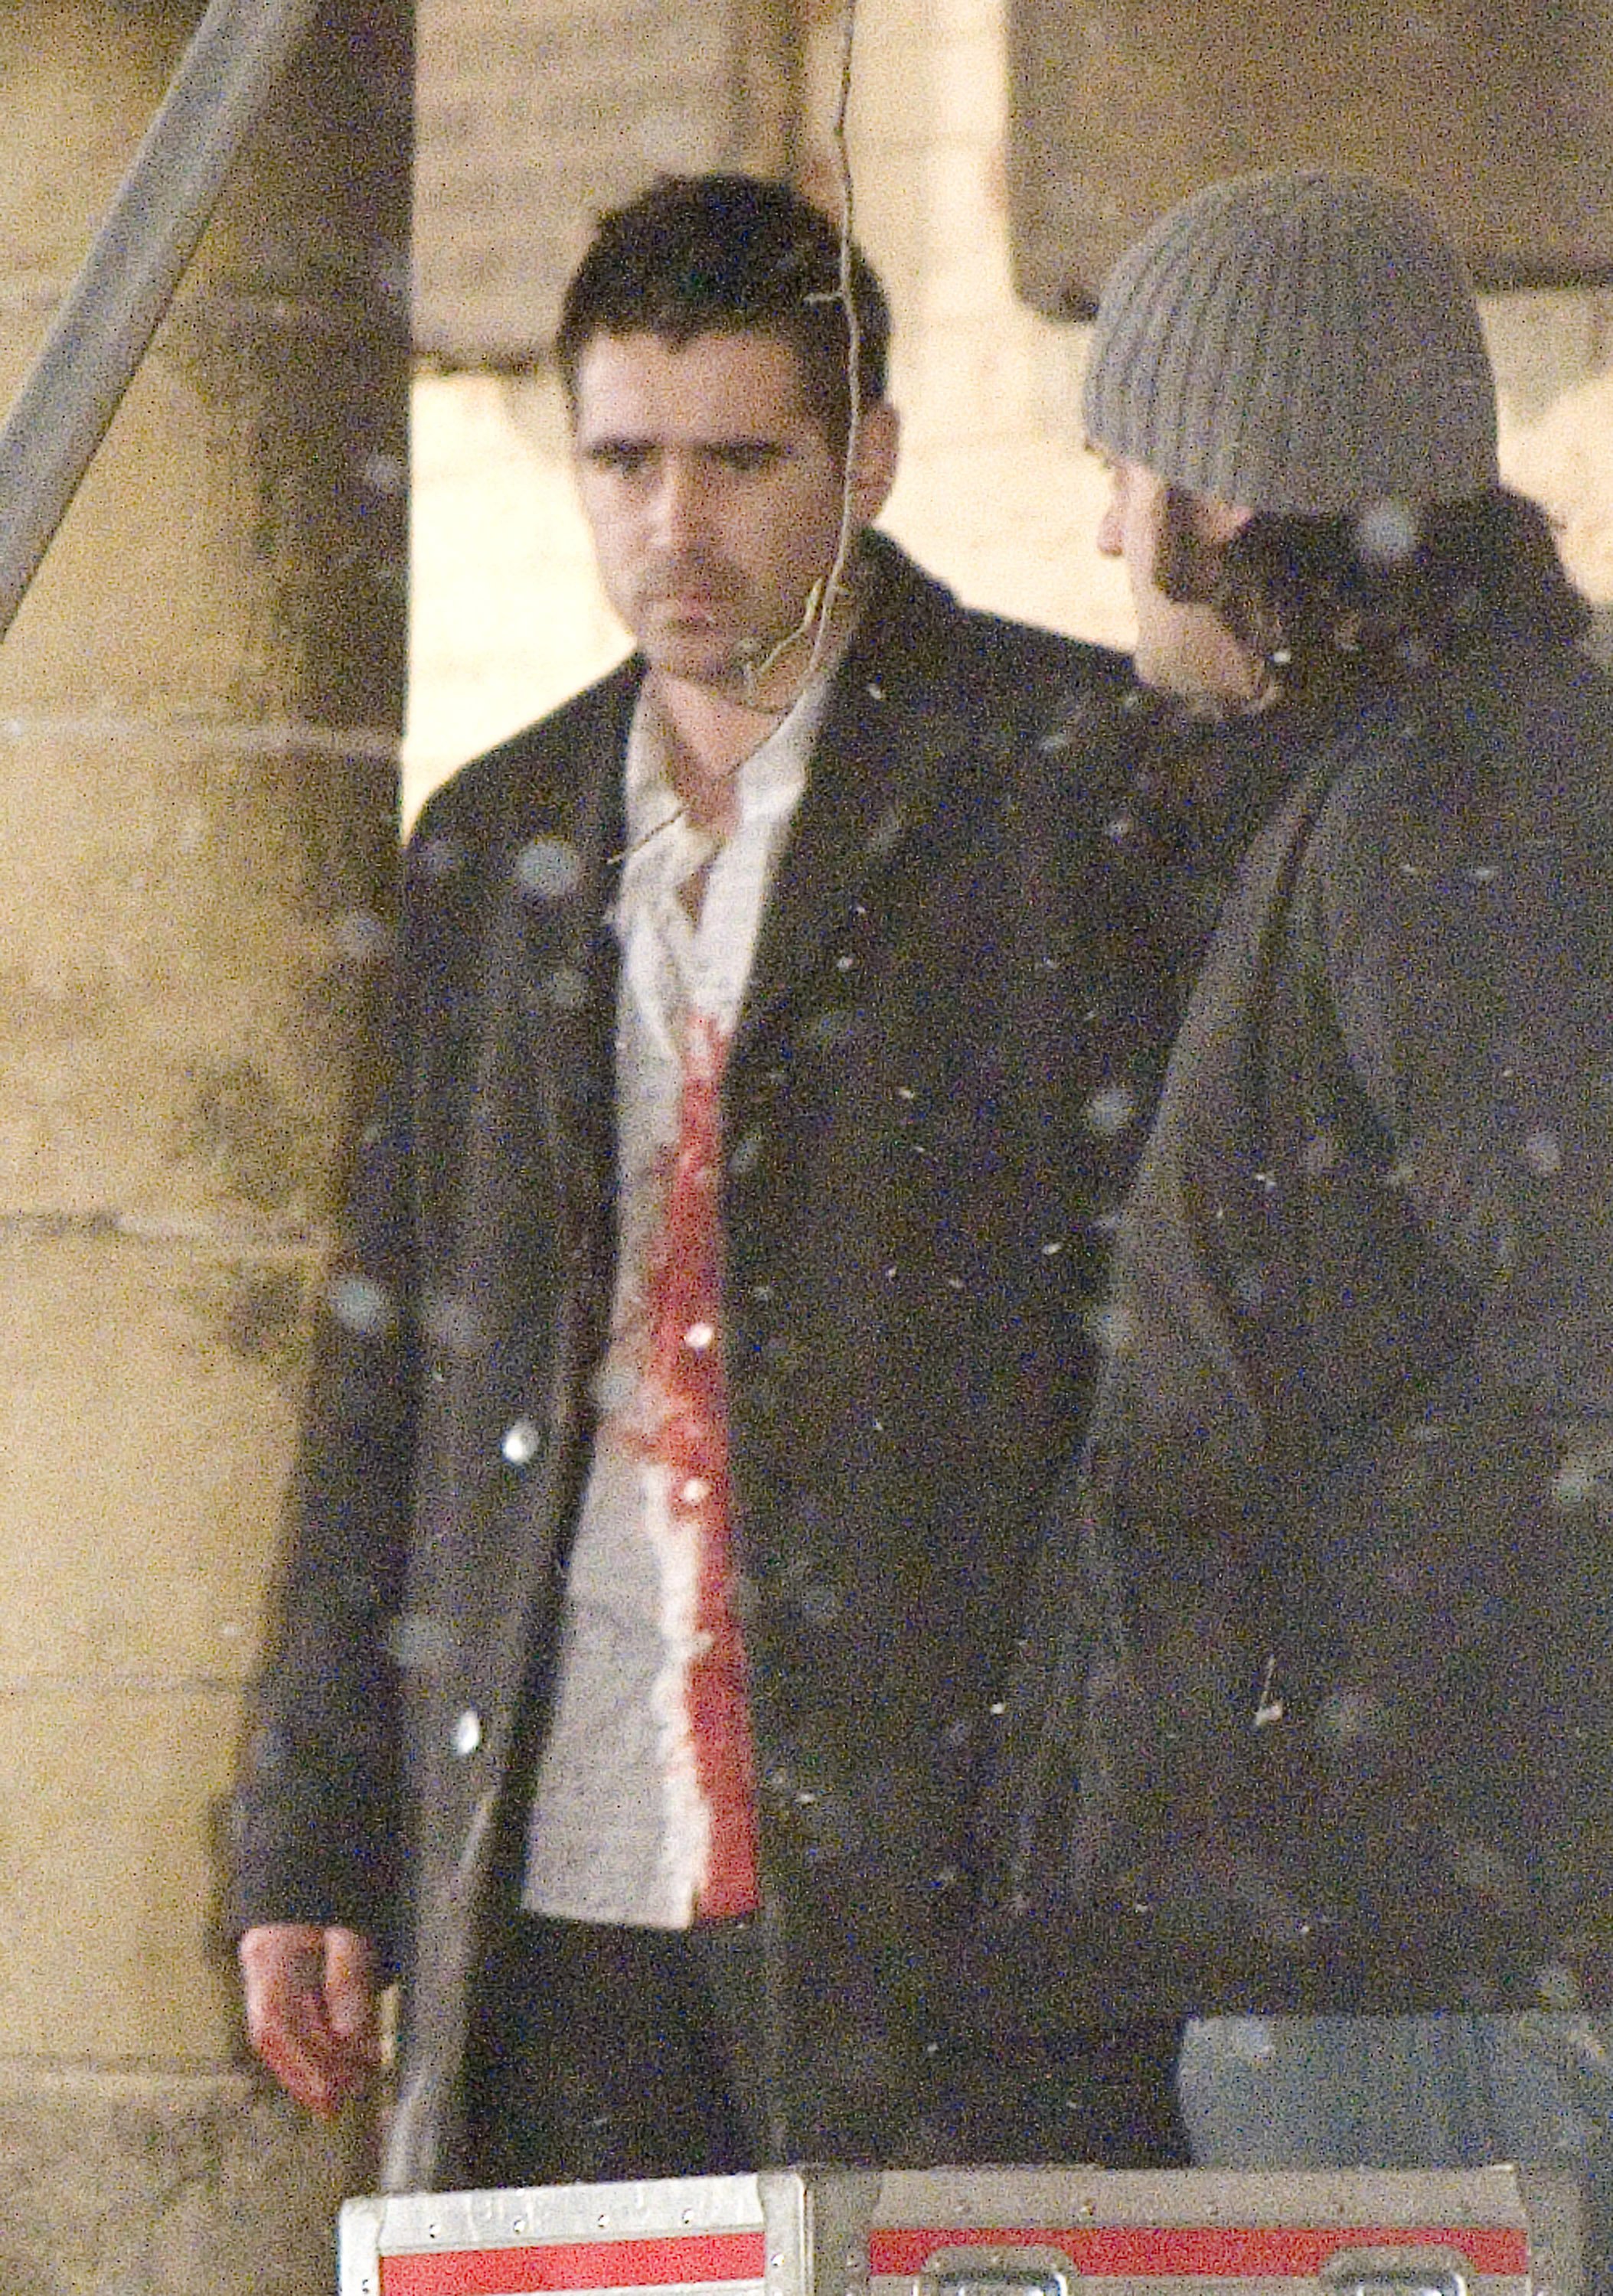 Colin Farrell and Ralph Fiennes on Location for "In Bruges" on February 14, 2006 in Bruges, Belgium. | Source: Jacques Moineau/FilmMagic